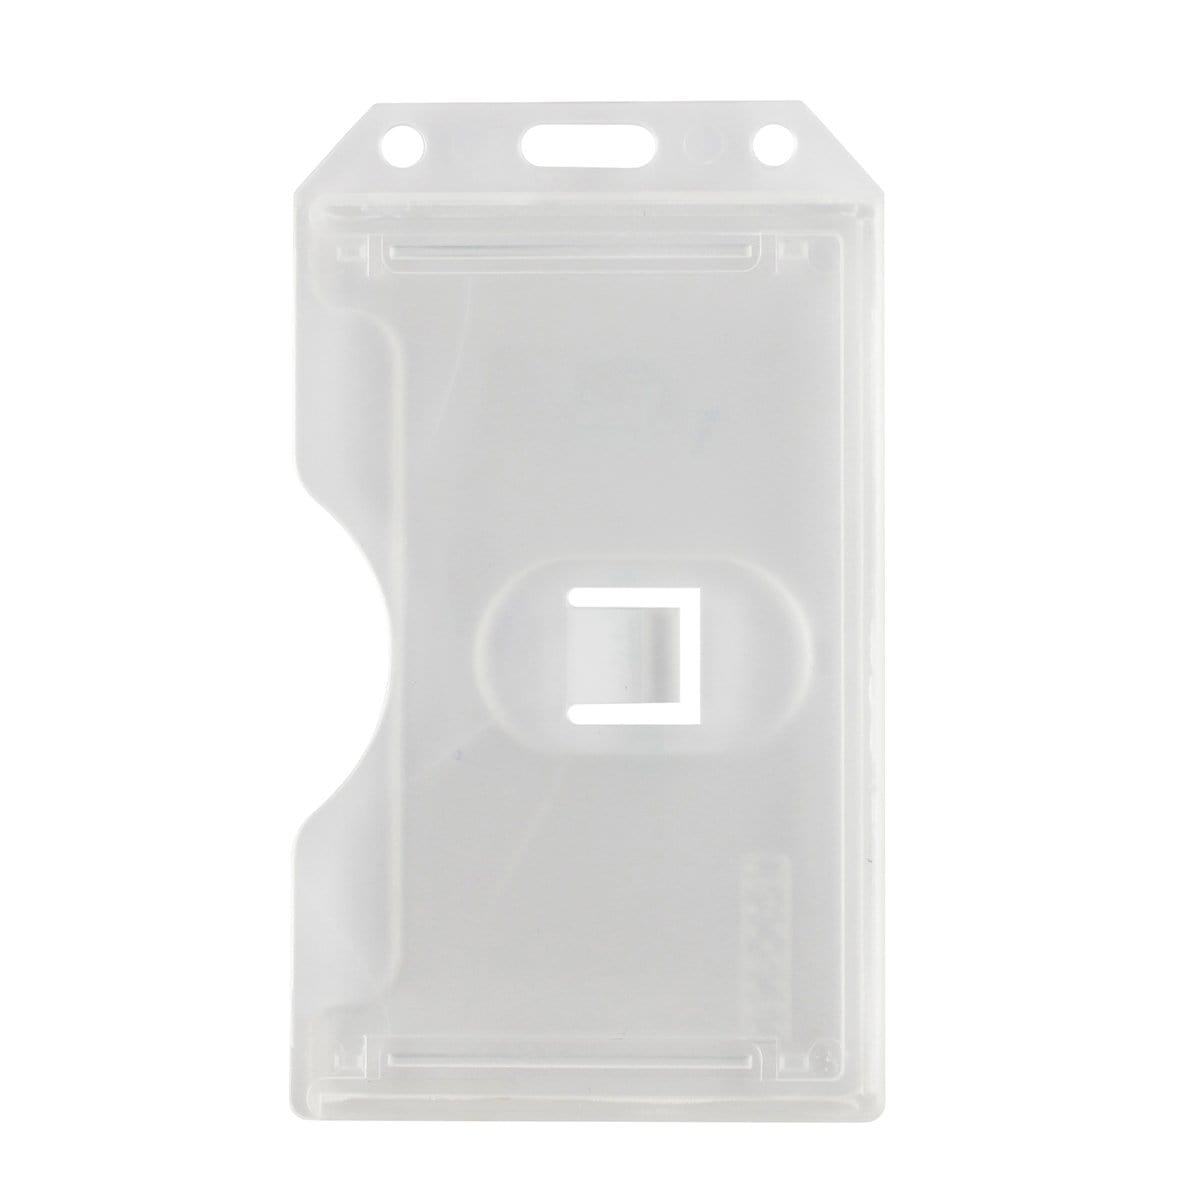 A 2 Sided Rigid Vertical MultiCard Badge Holder - Hard Plastic Multiple ID Card Holder (1840-308X), featuring a cutout slot and a hole on top for attachment.